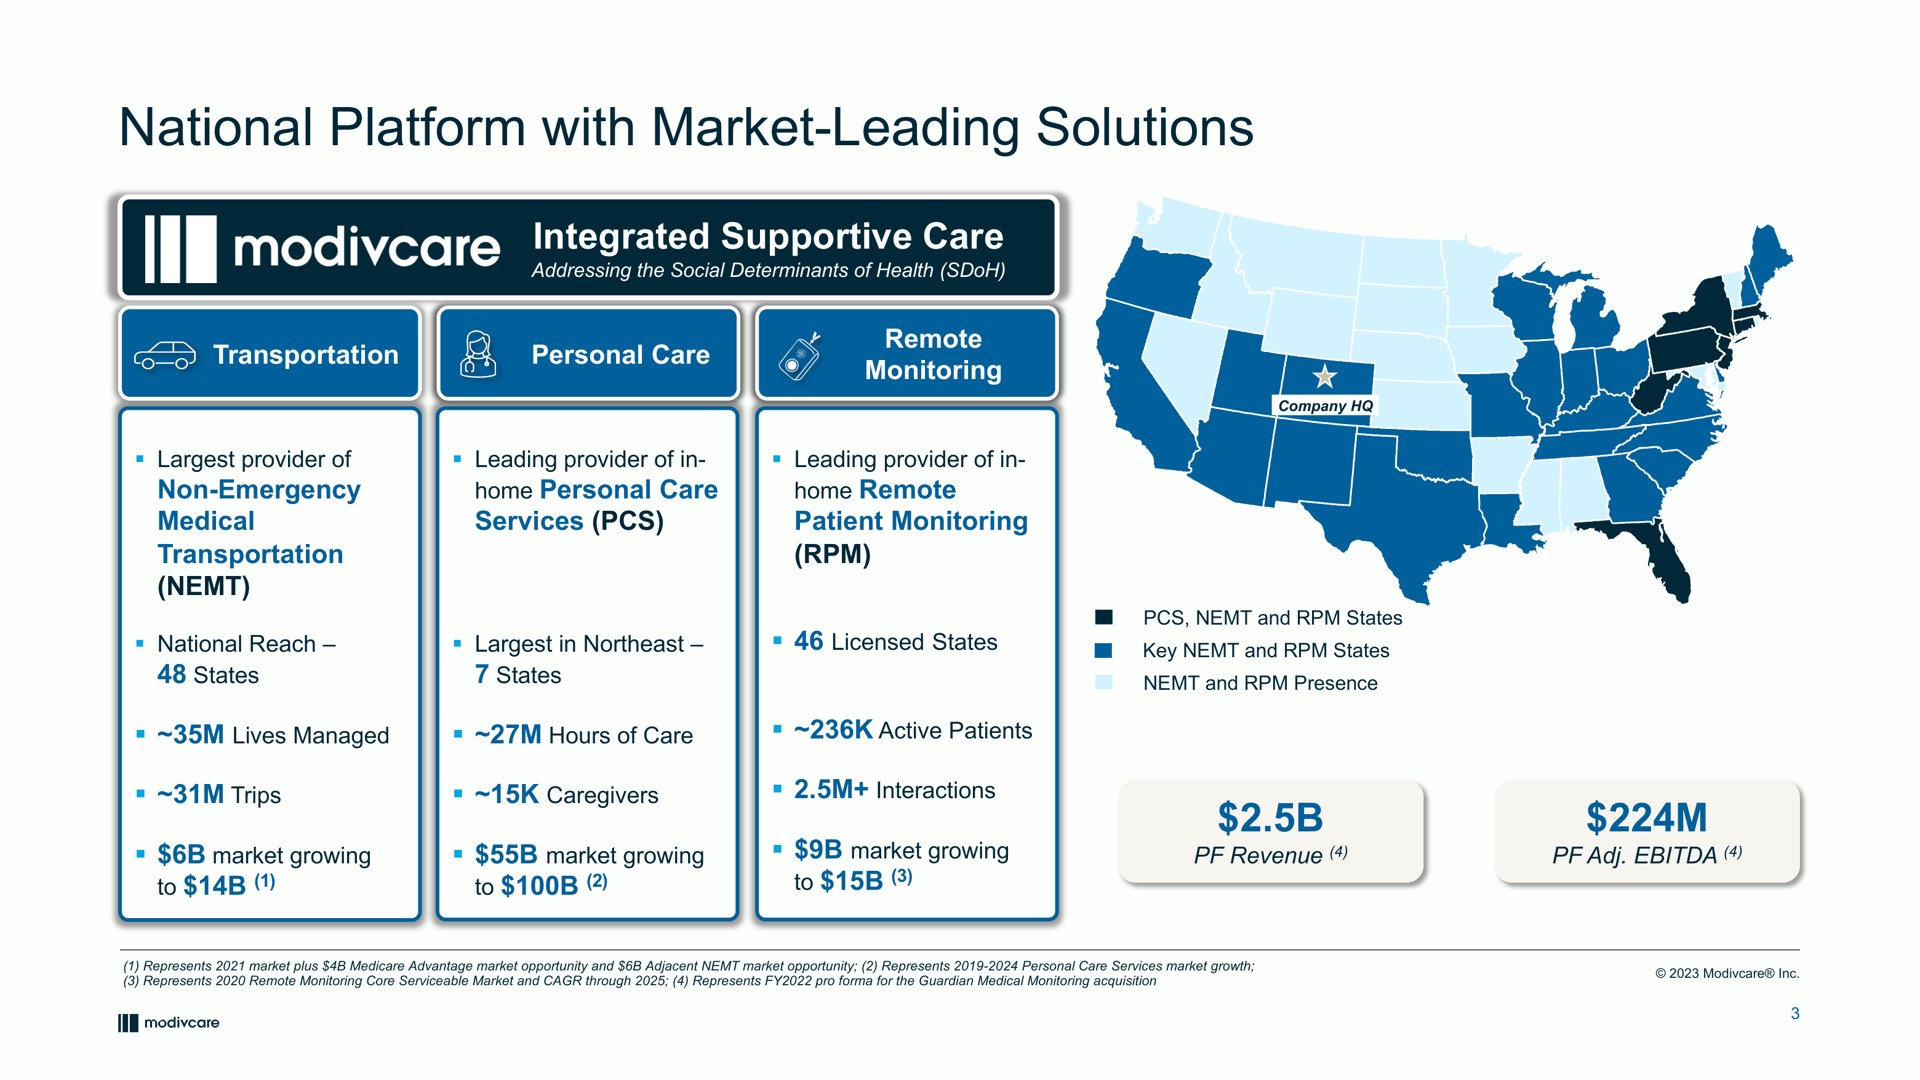 national platform with market leading solutions integrated supportive care | ModivCare